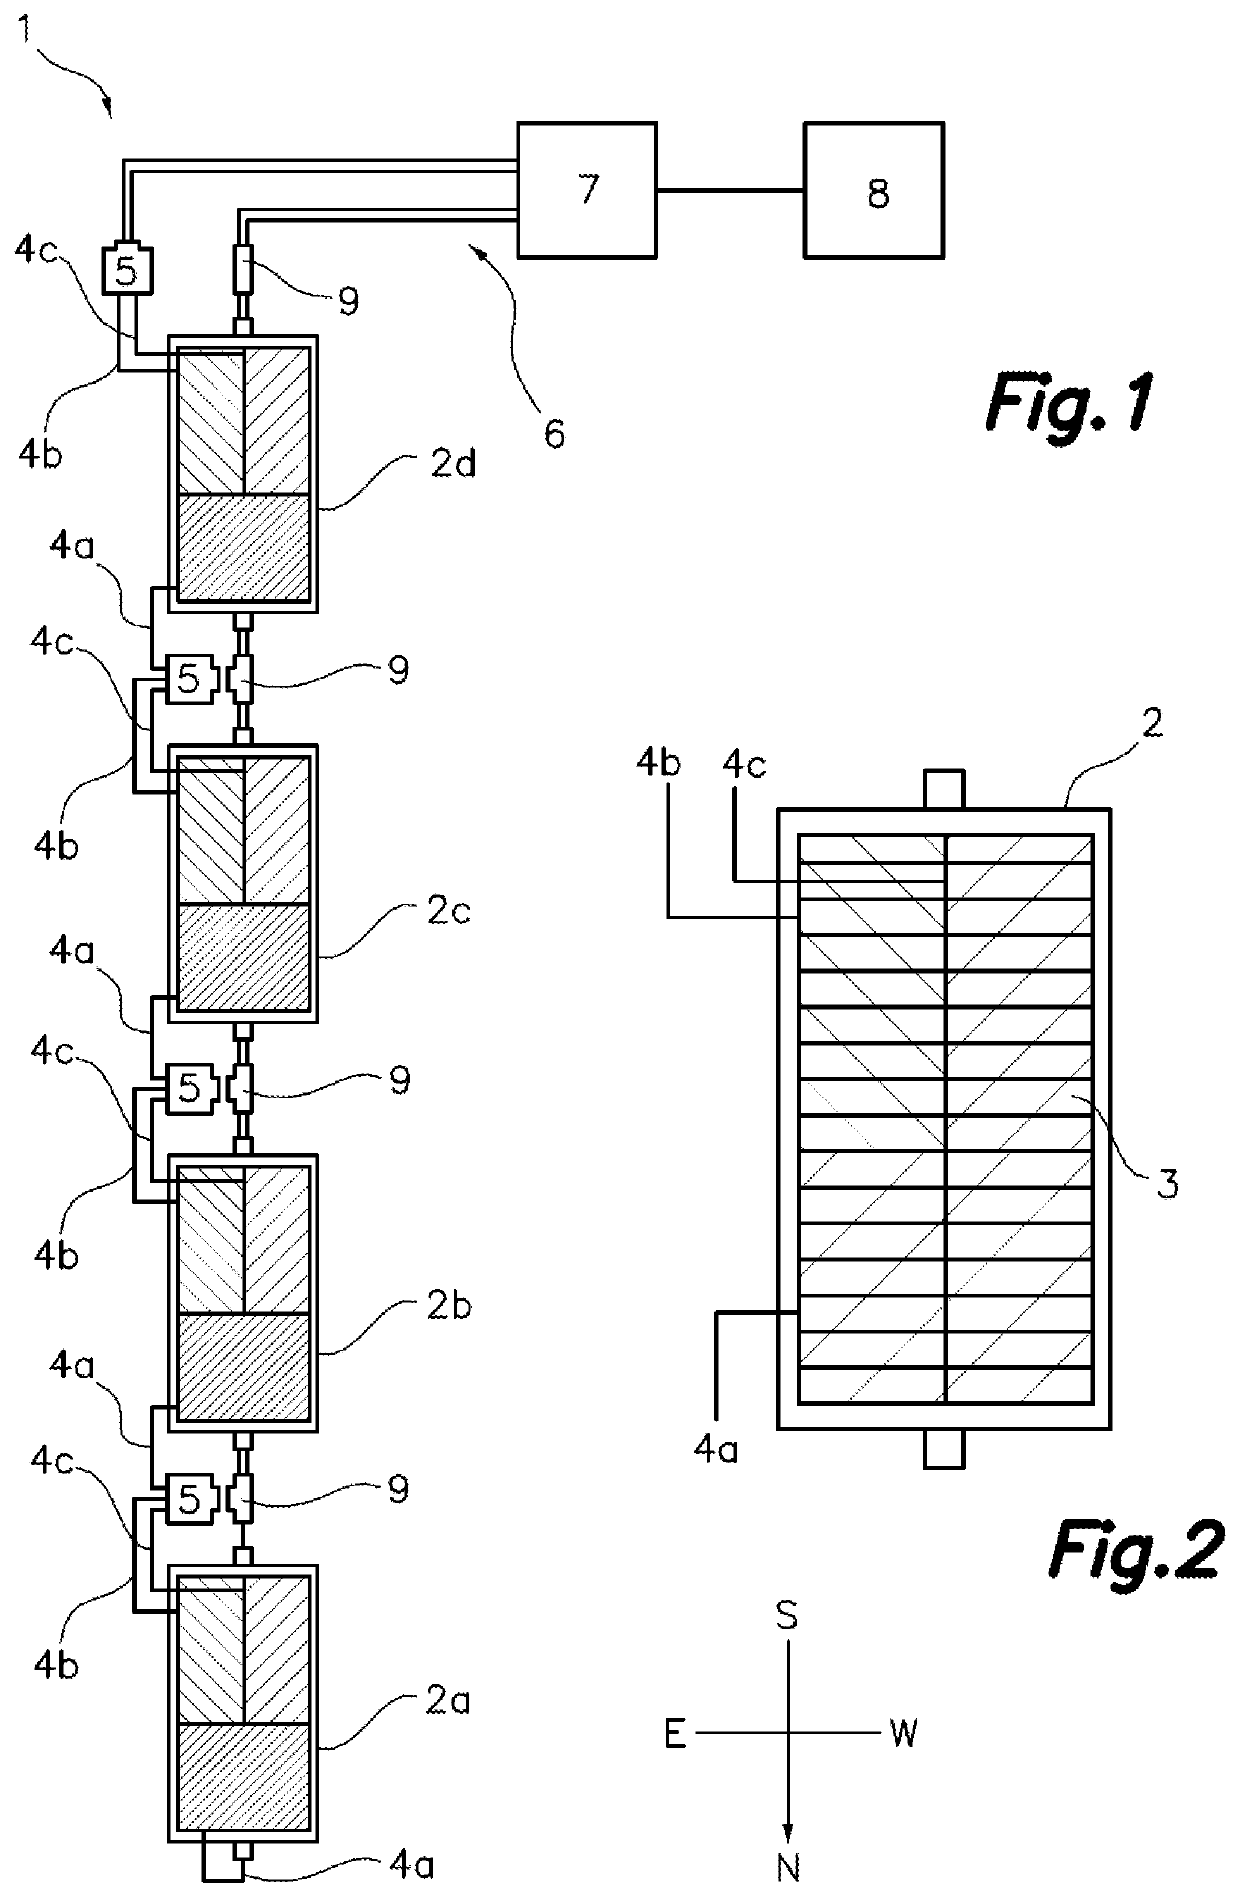 Photovoltaic cabling optimization for solar trackers using a plug and play harness configuration